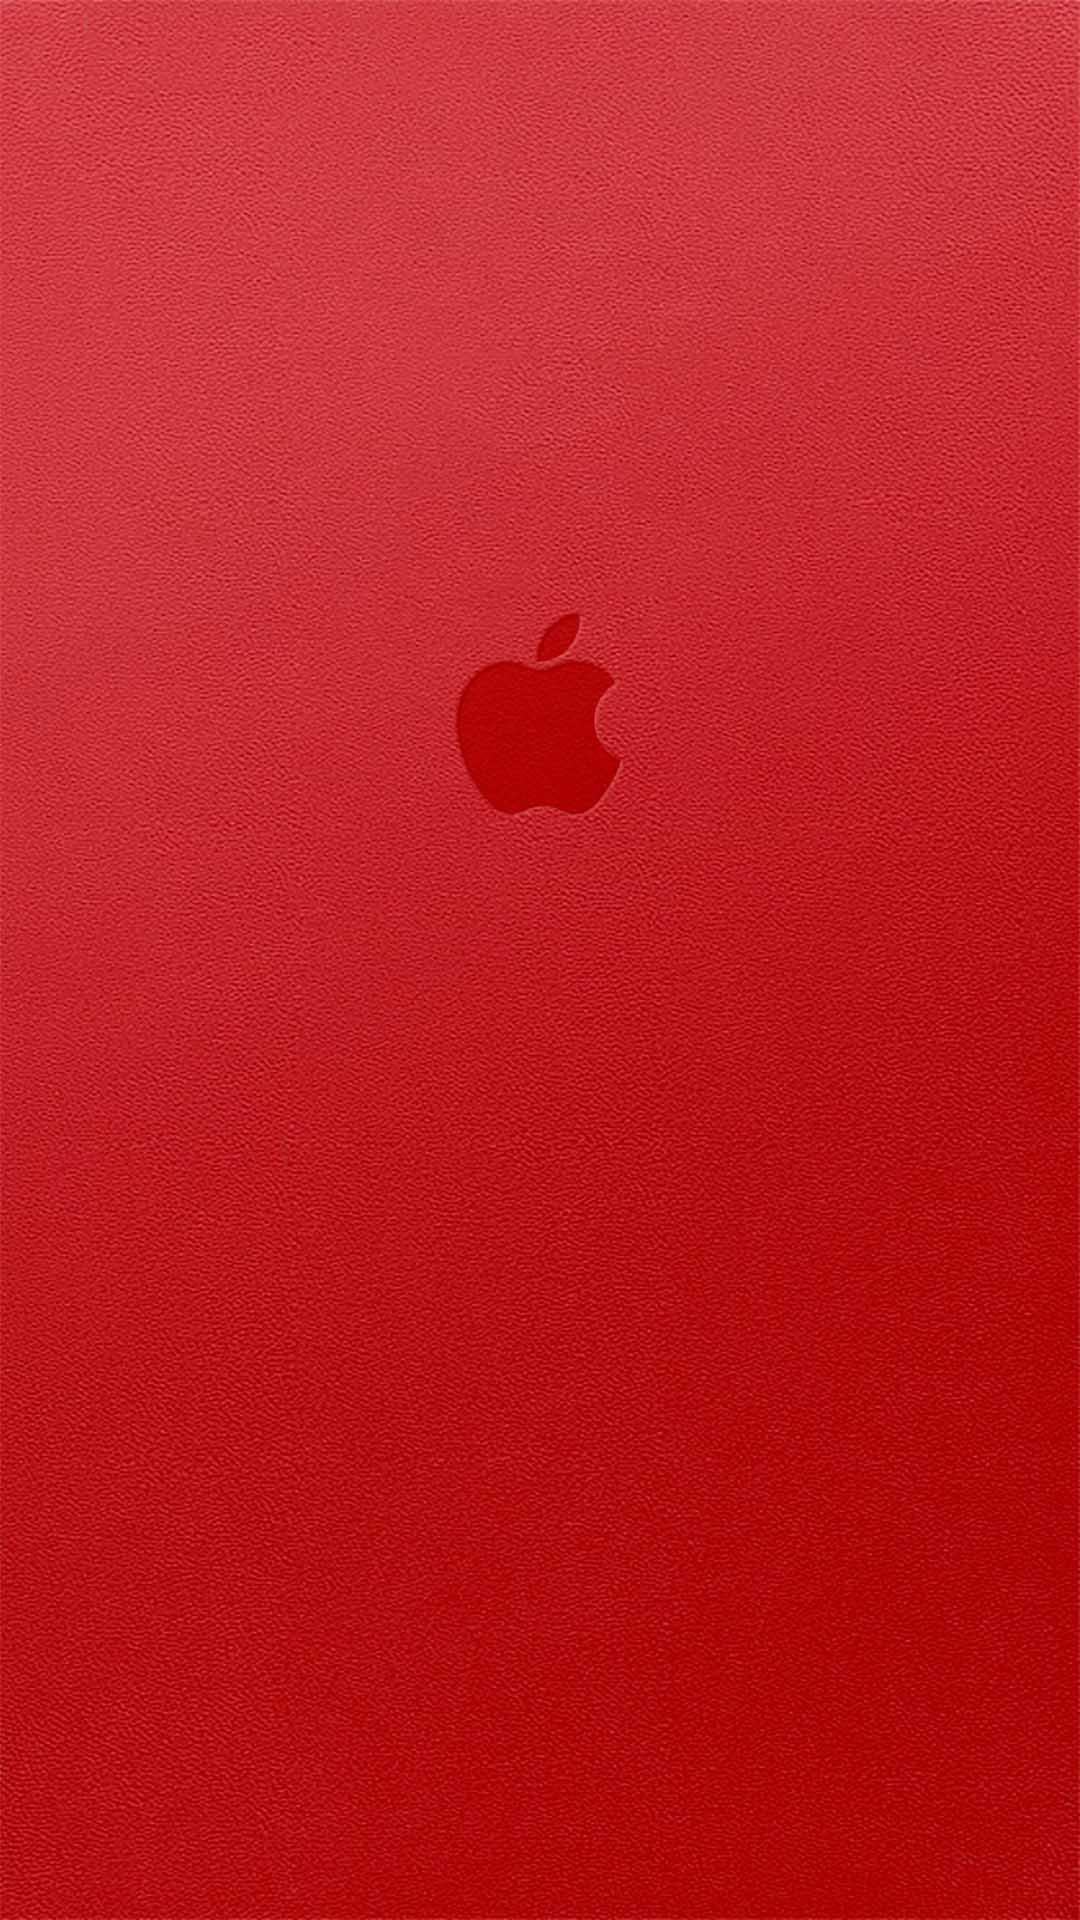 Red シンプルでかっこいいiphone壁紙 Iphone Wallpapers